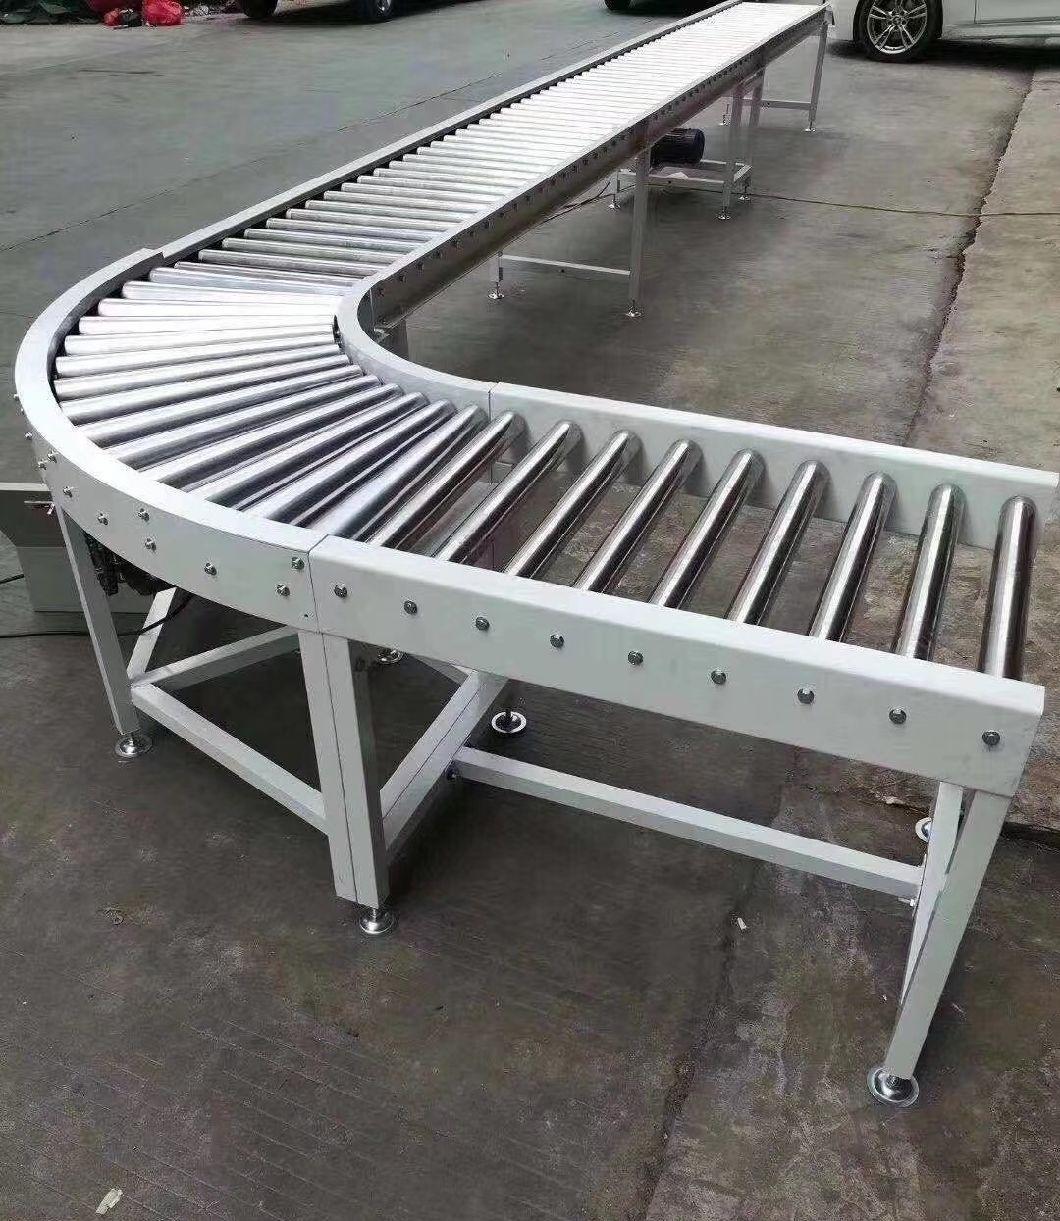 Chain Plate Conveyor with 90 Degree Turning Used in Small Workshop